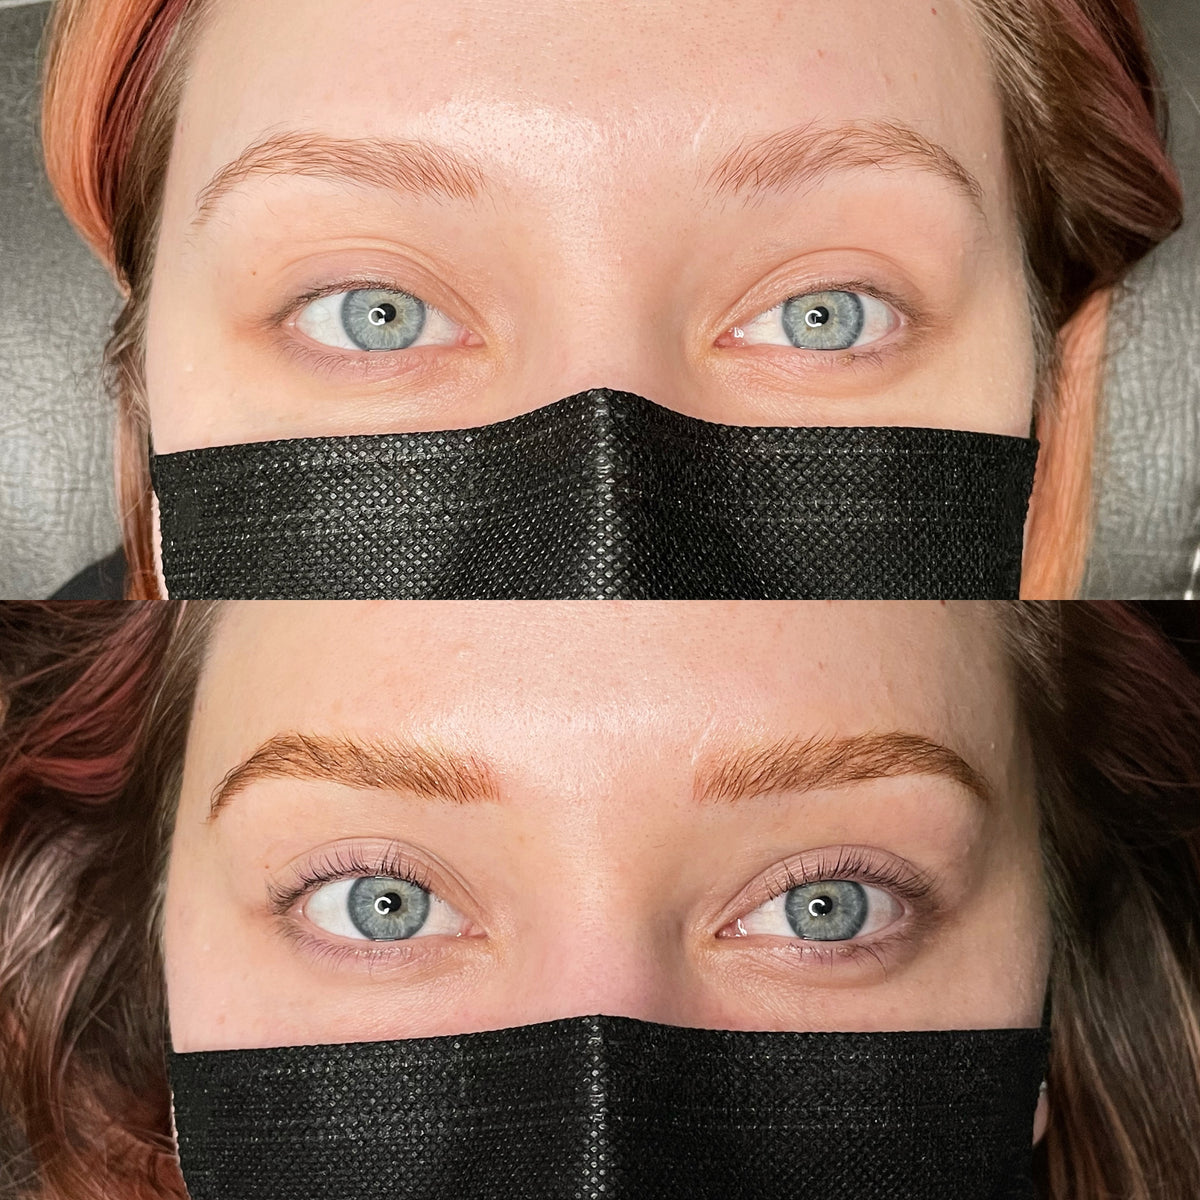 Microblading - Before/After Comparison